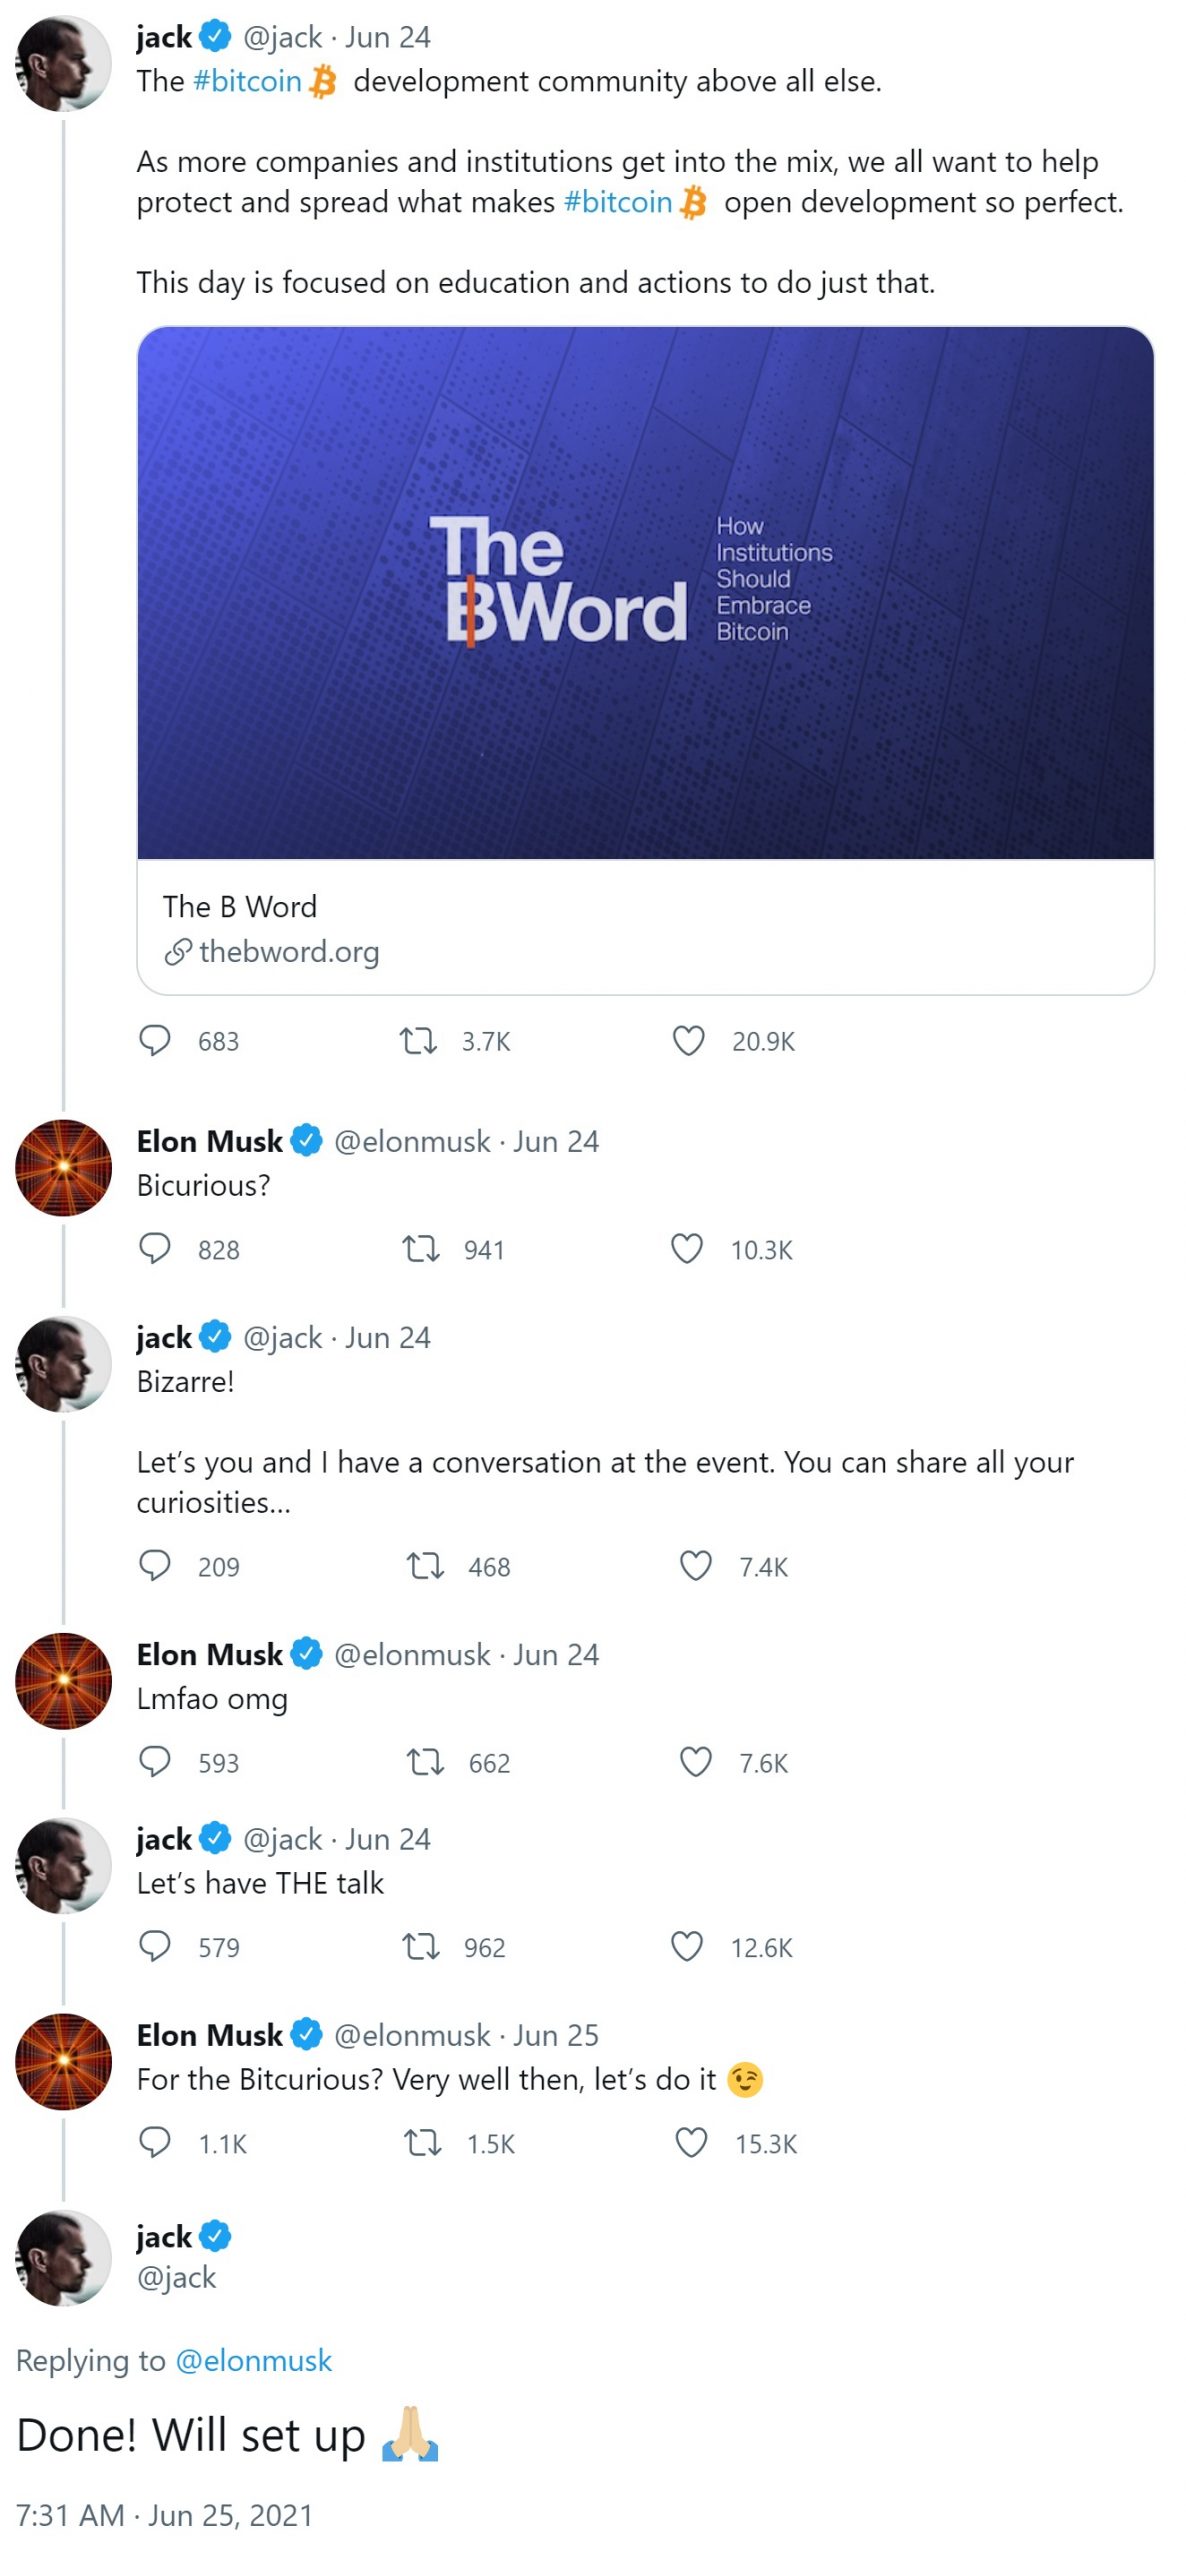 Tesla S Elon Musk And Twitter S Jack Dorsey Agree To Have The Talk At Bitcoin Event B Word Featured Bitcoin News